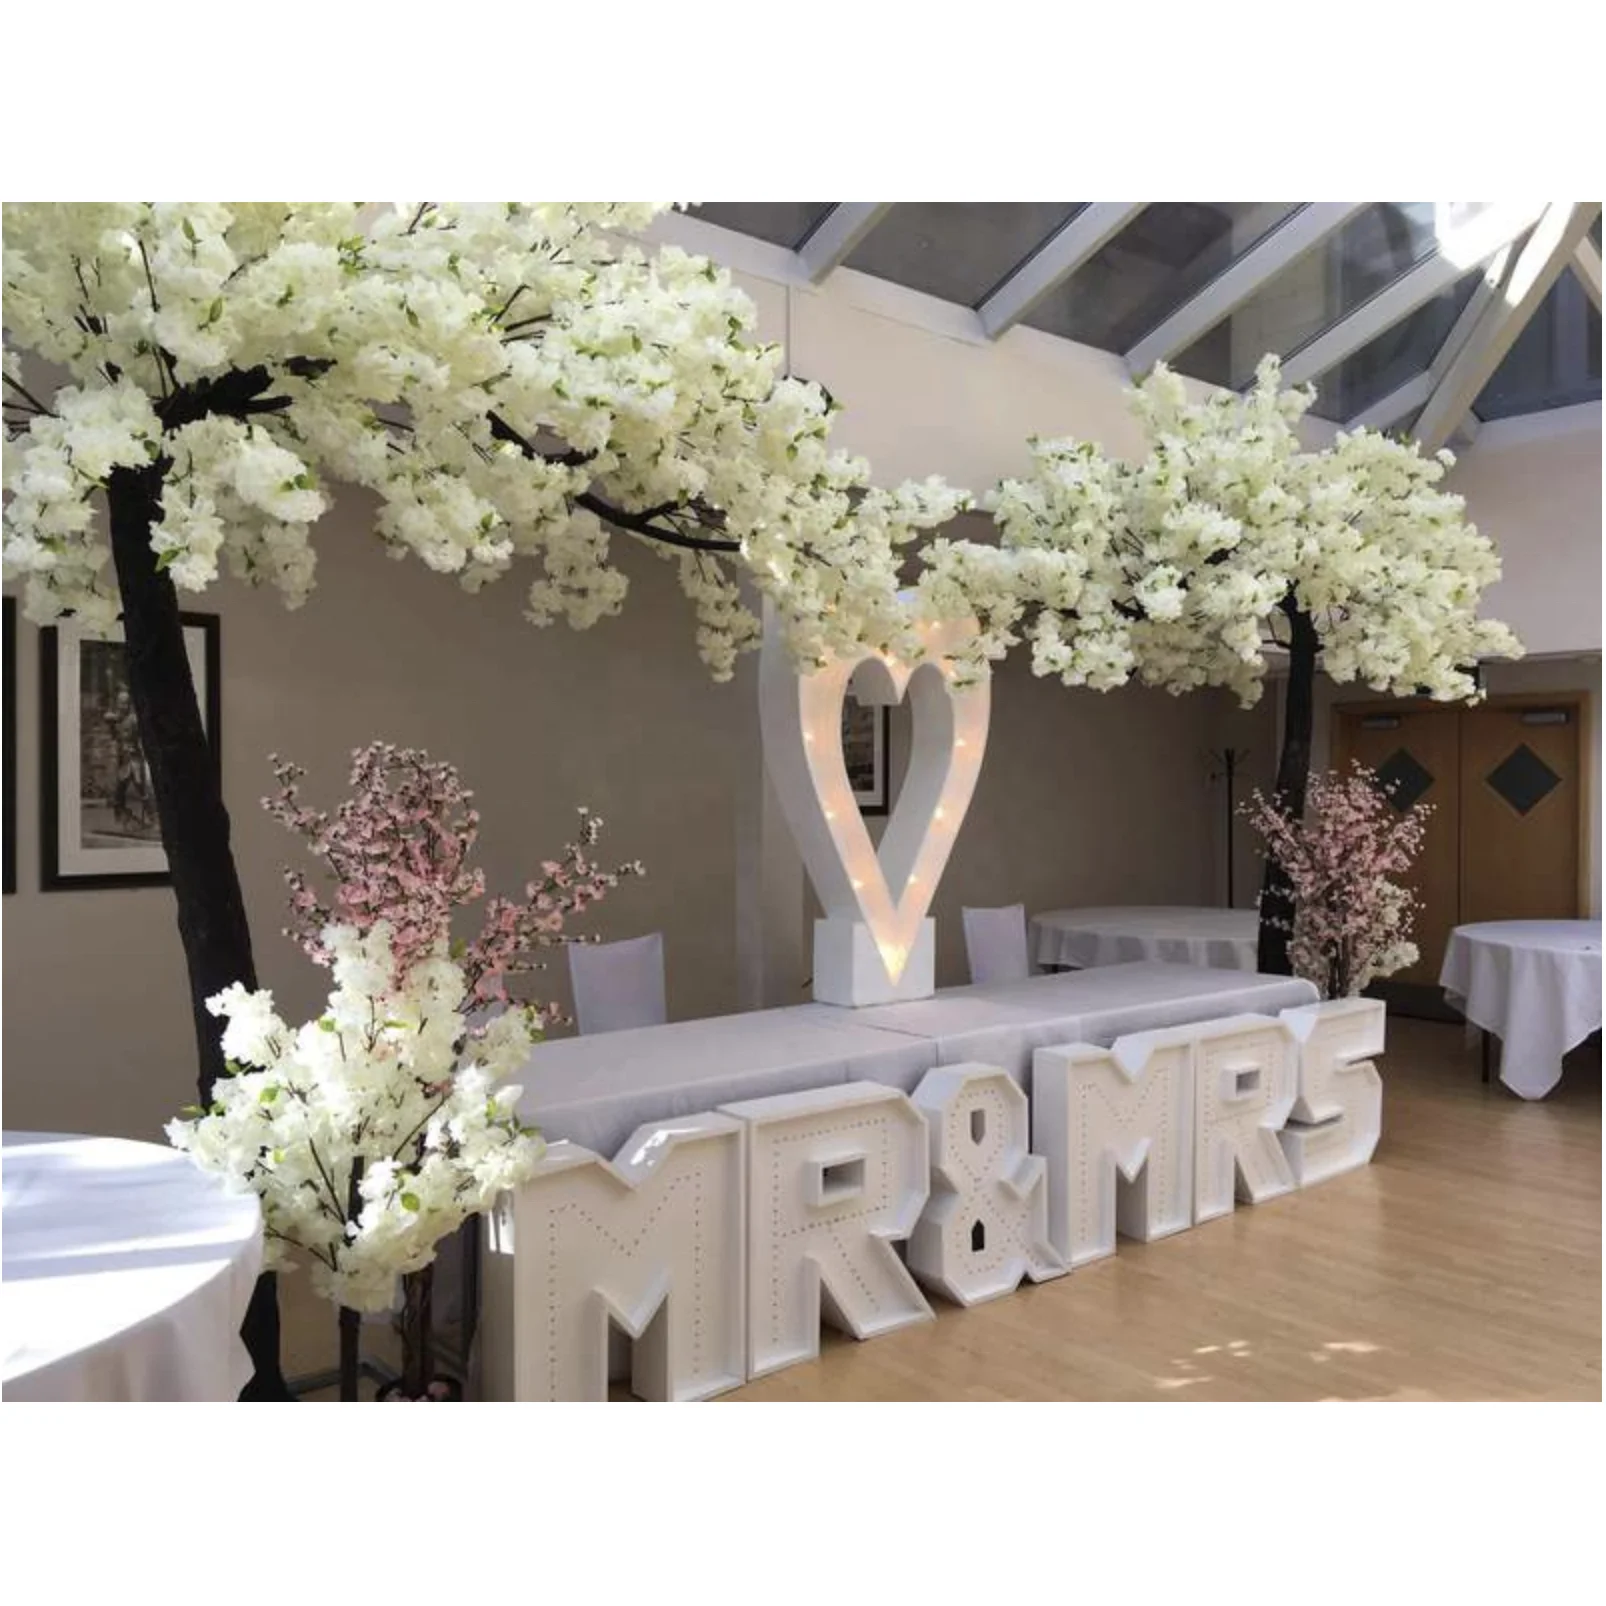 

10Ft Hot Sell Indoor Artificial Cherry Blossom Tree Arch Arboles Artificiales Wedding Centerpiece Trees